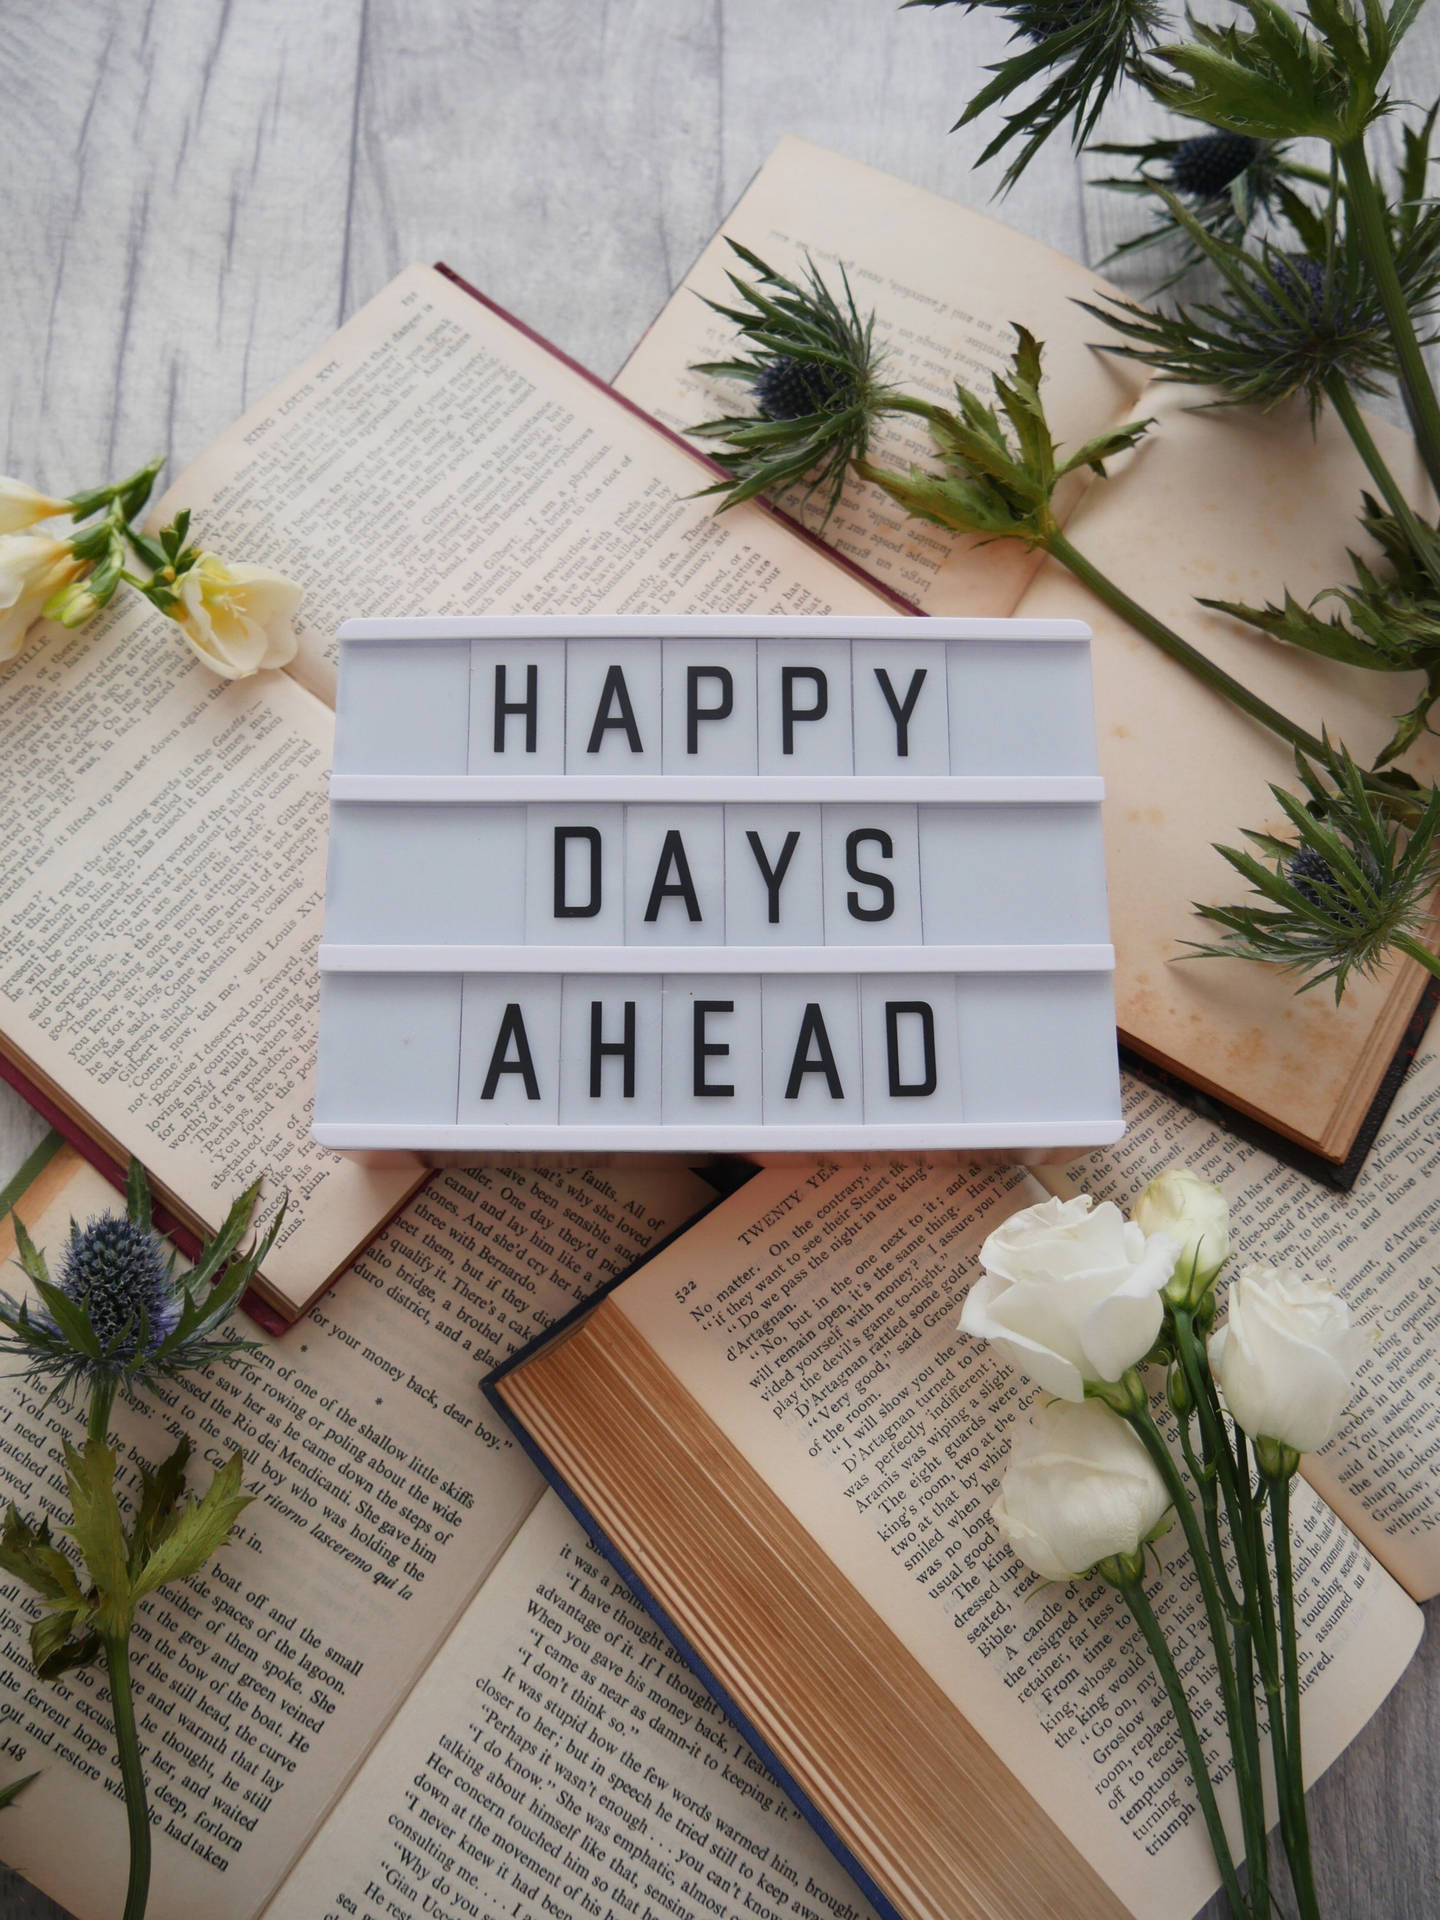 Happy Days Ahead Inspirational Quote